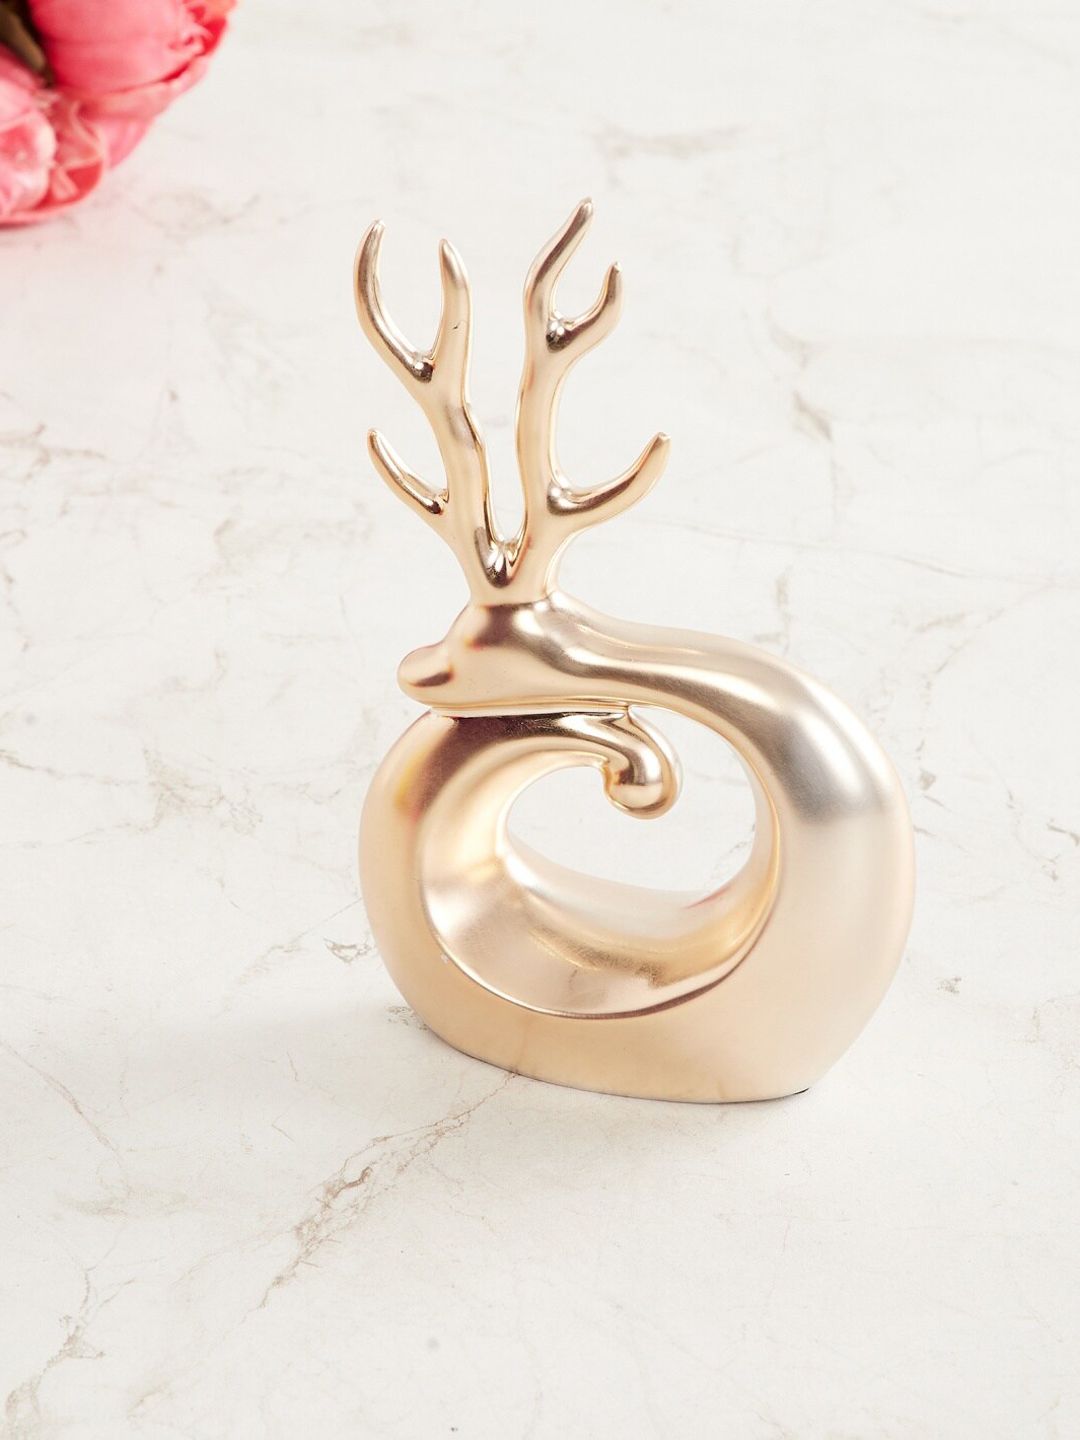 Home Centre Gold-Toned Solid Ceramic Deer Figurine Showpiece Price in India